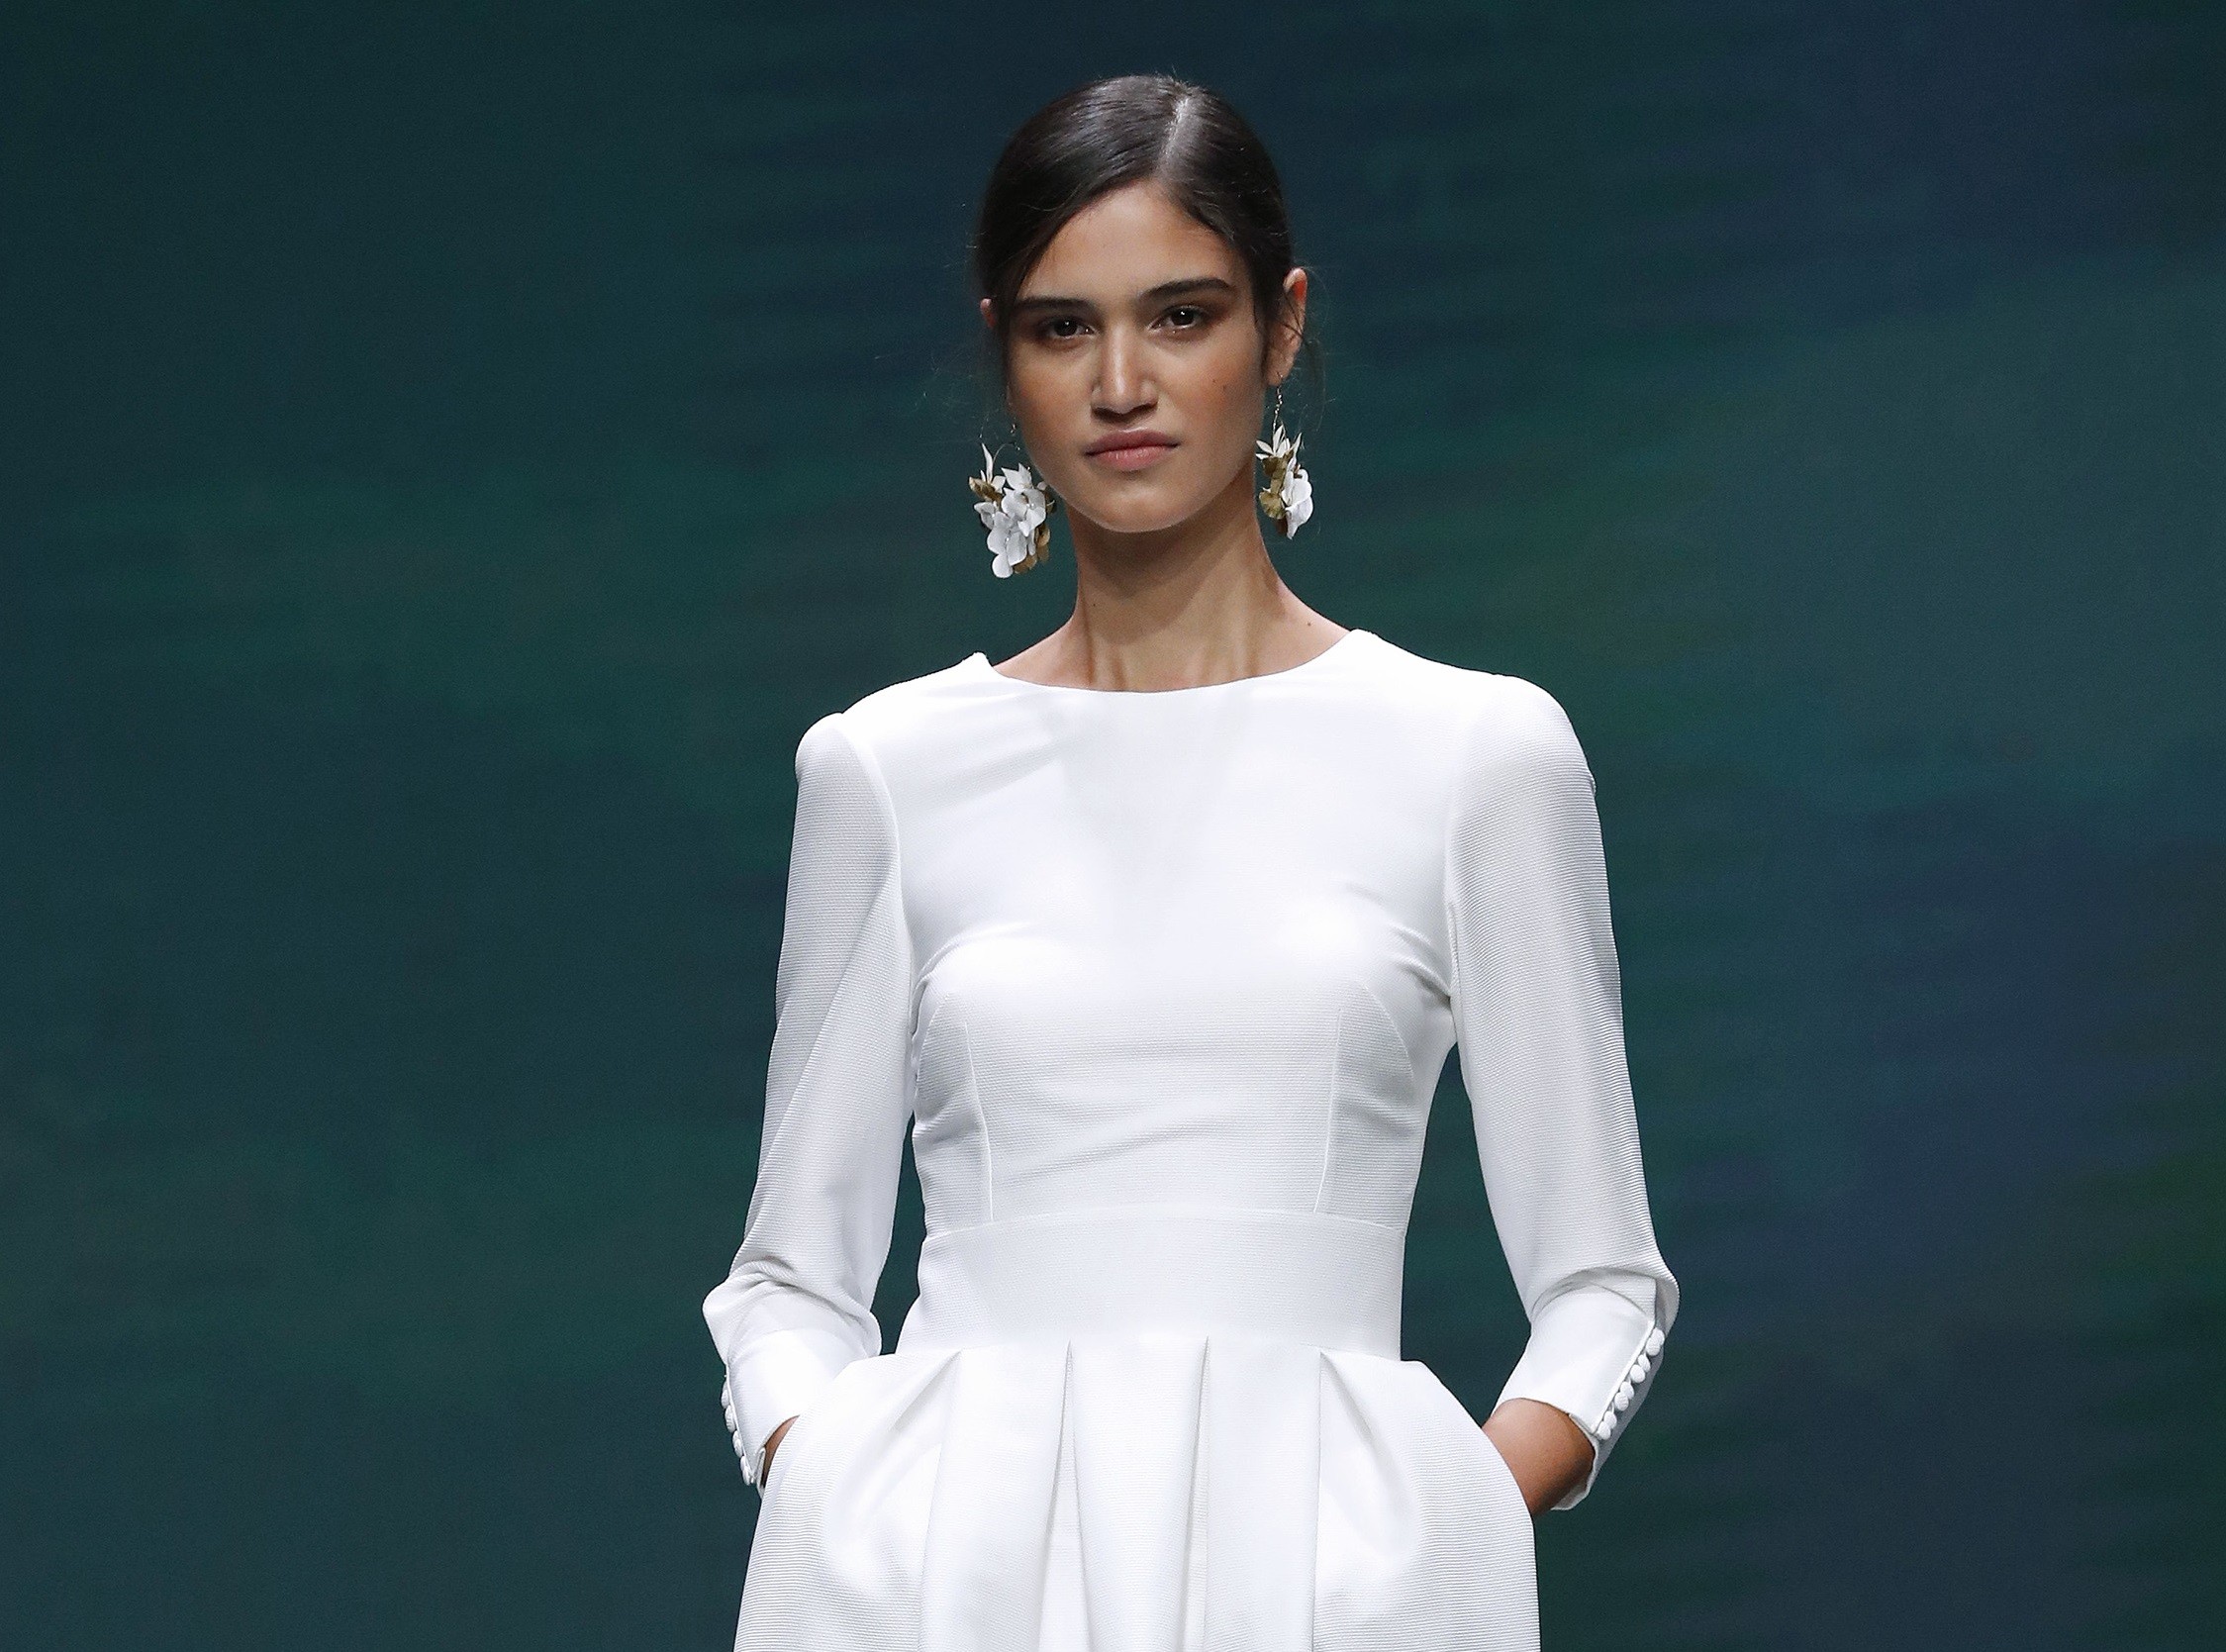 What wedding outfit suits the minimalist woman? Here are 4 editorial picks